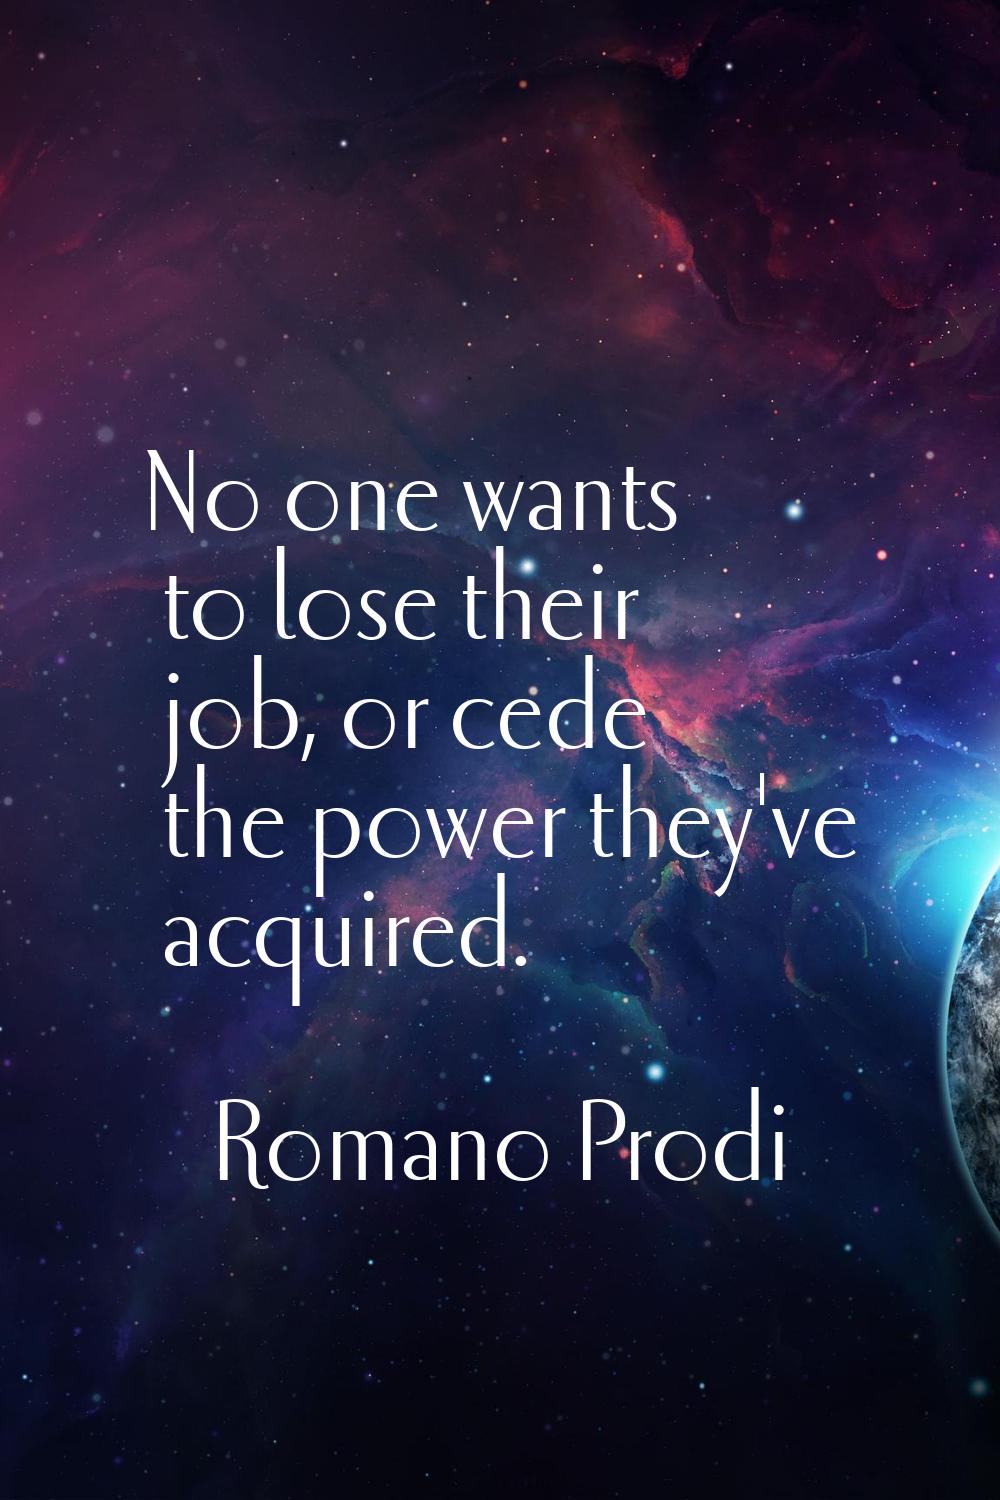 No one wants to lose their job, or cede the power they've acquired.